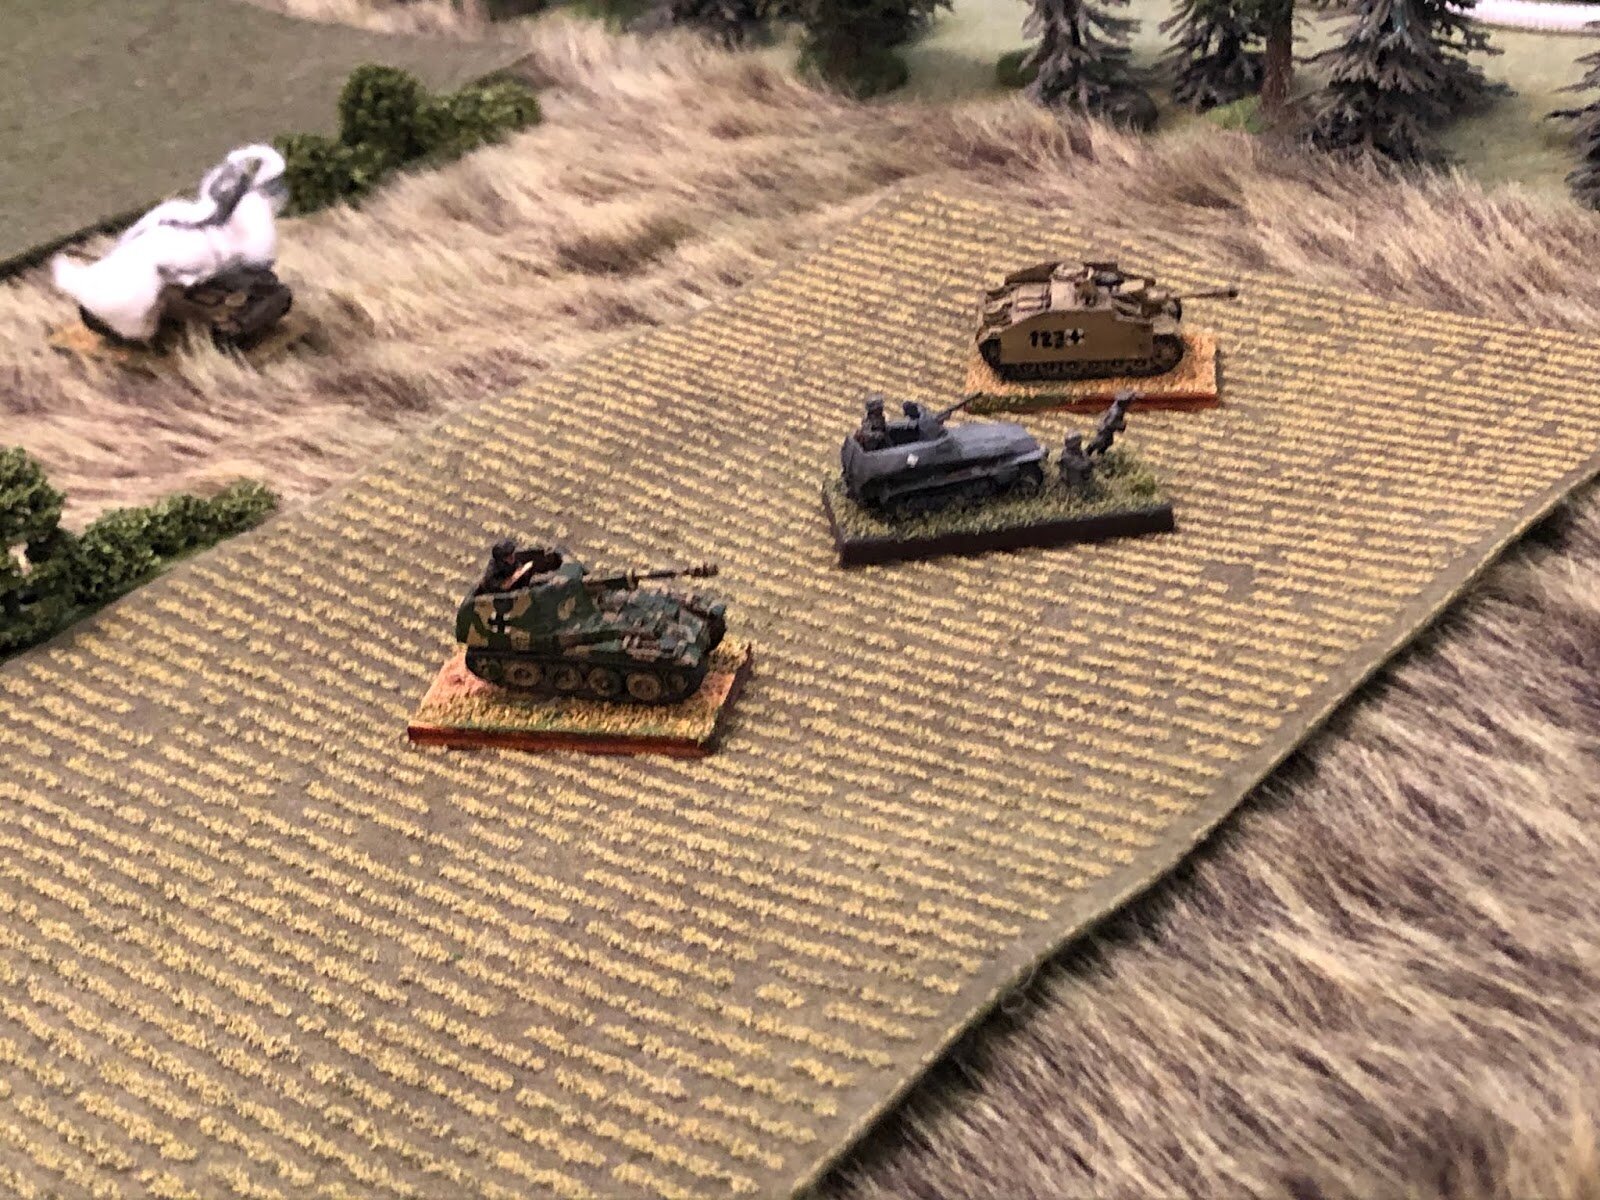  As the German CO, Marder, and Stug beat feet outta there!  